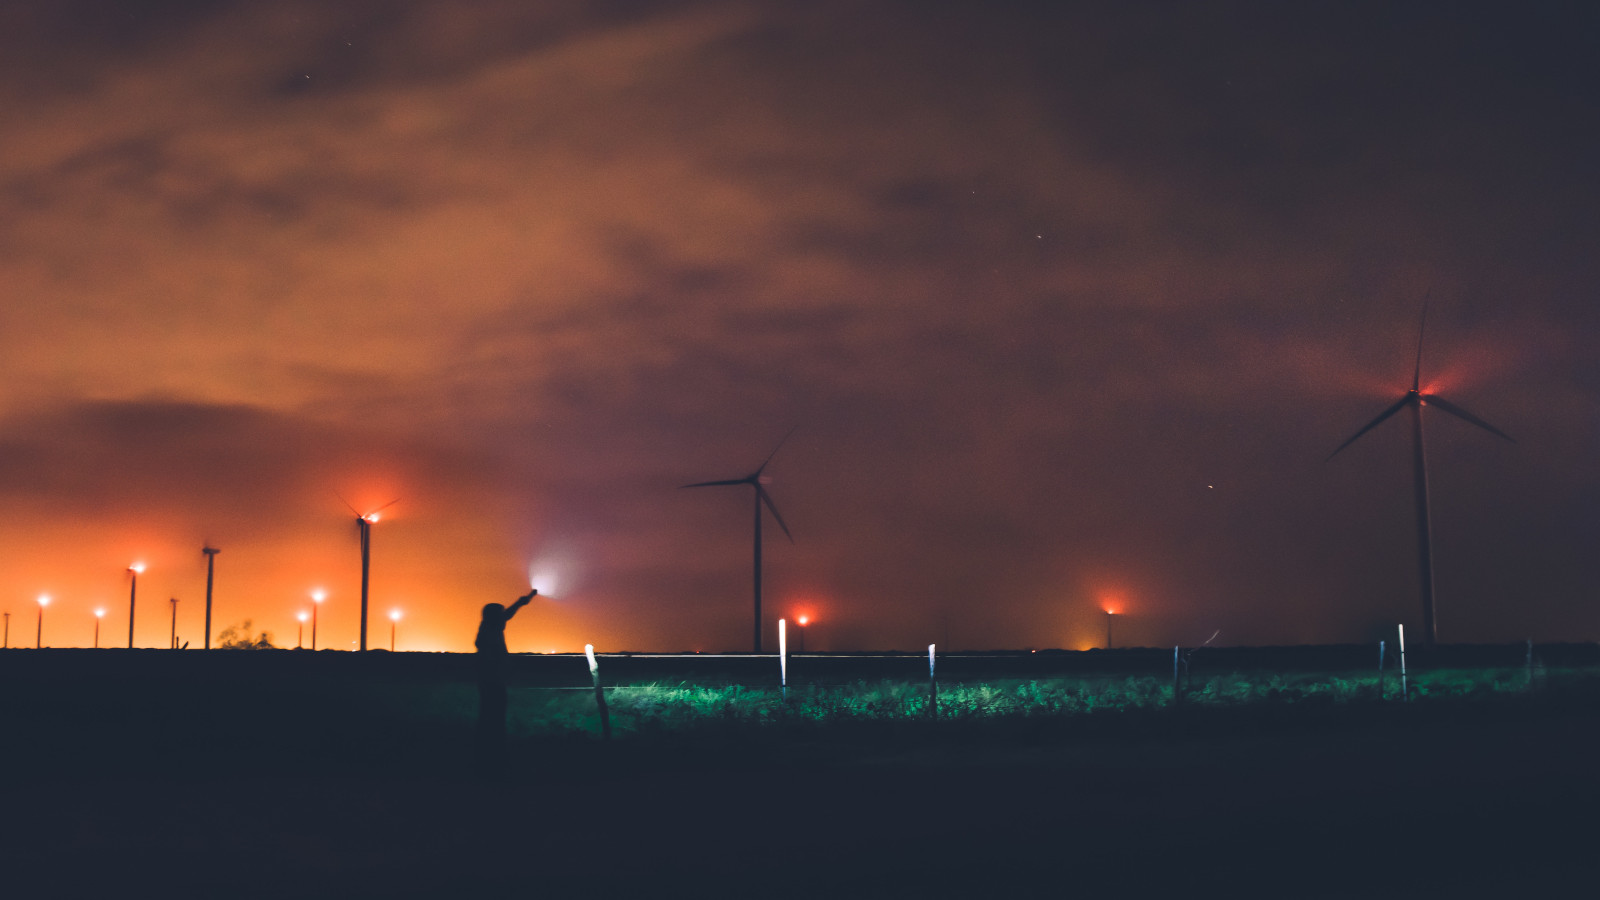 Wind Farms In The Night: On-Demand Warning Lights Are Coming | Hackaday